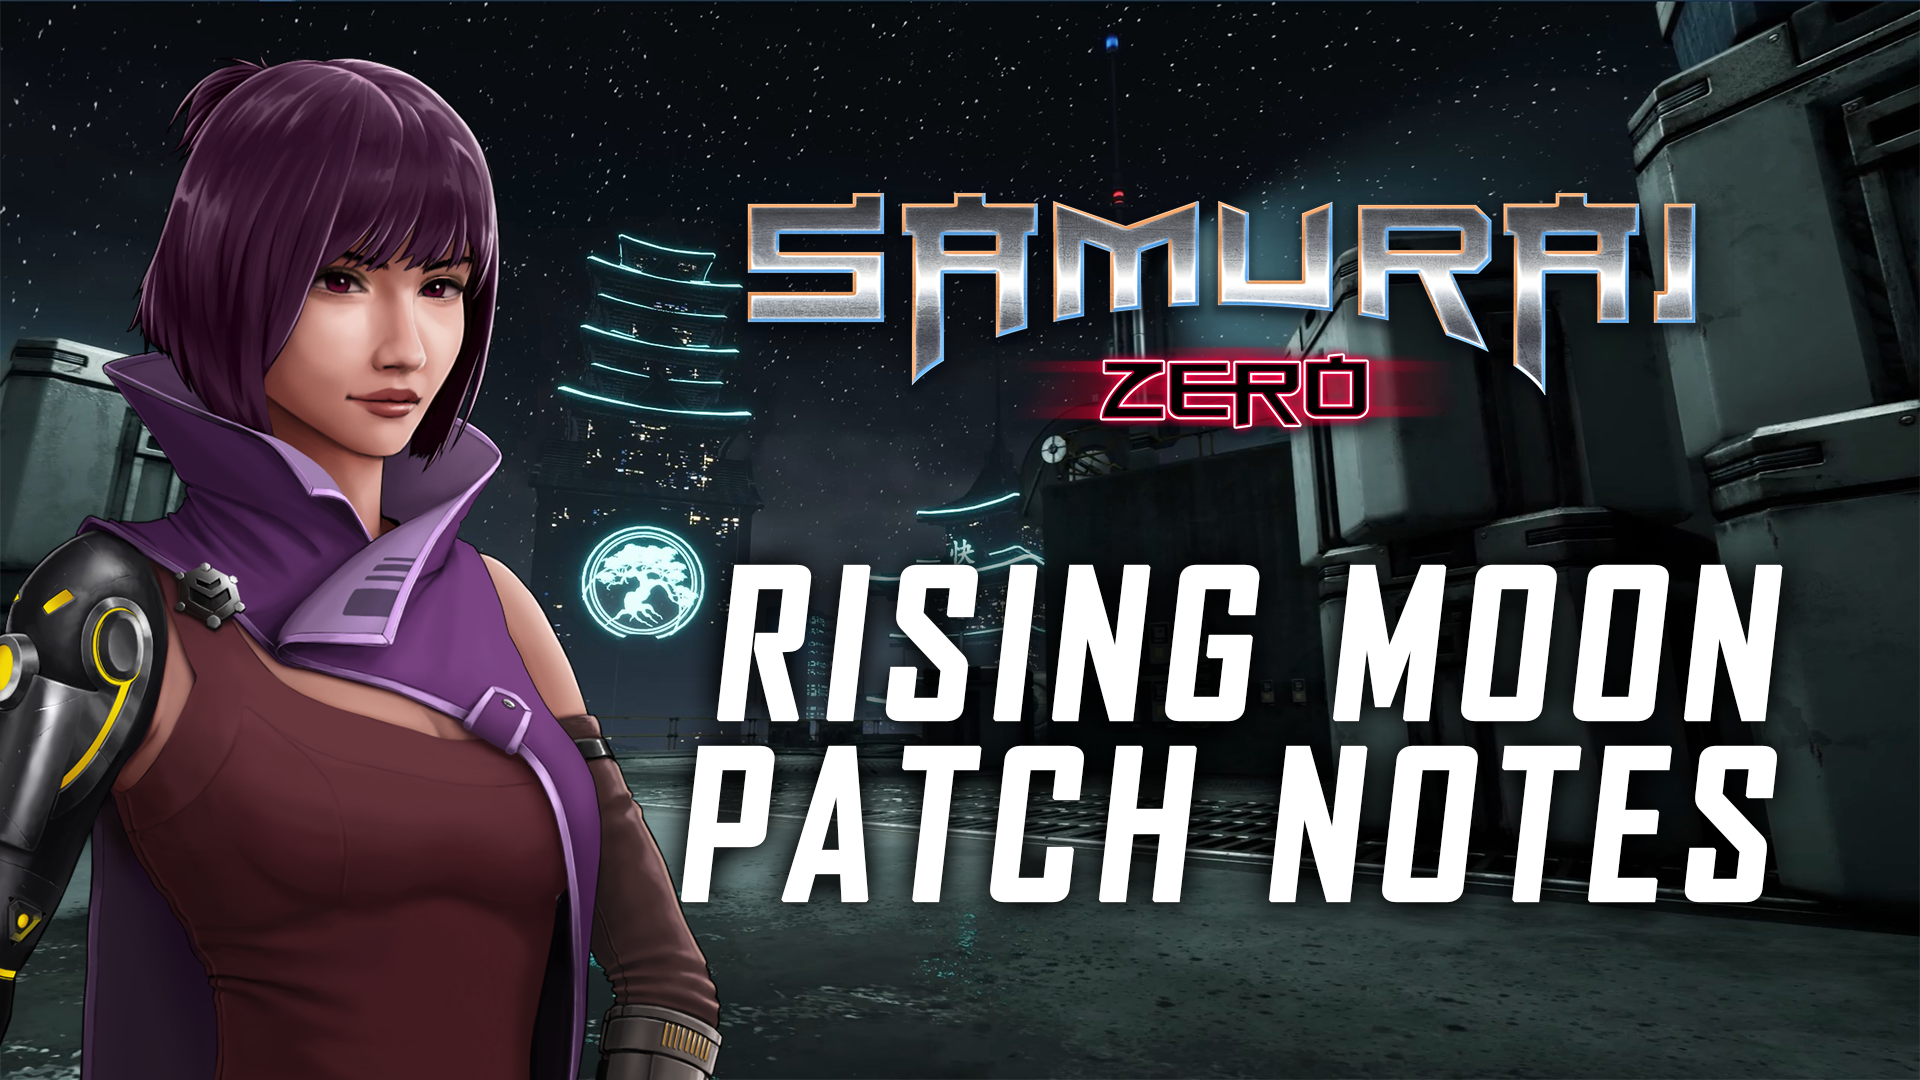 Patch Notes: Patch 0.3 Rising Moon